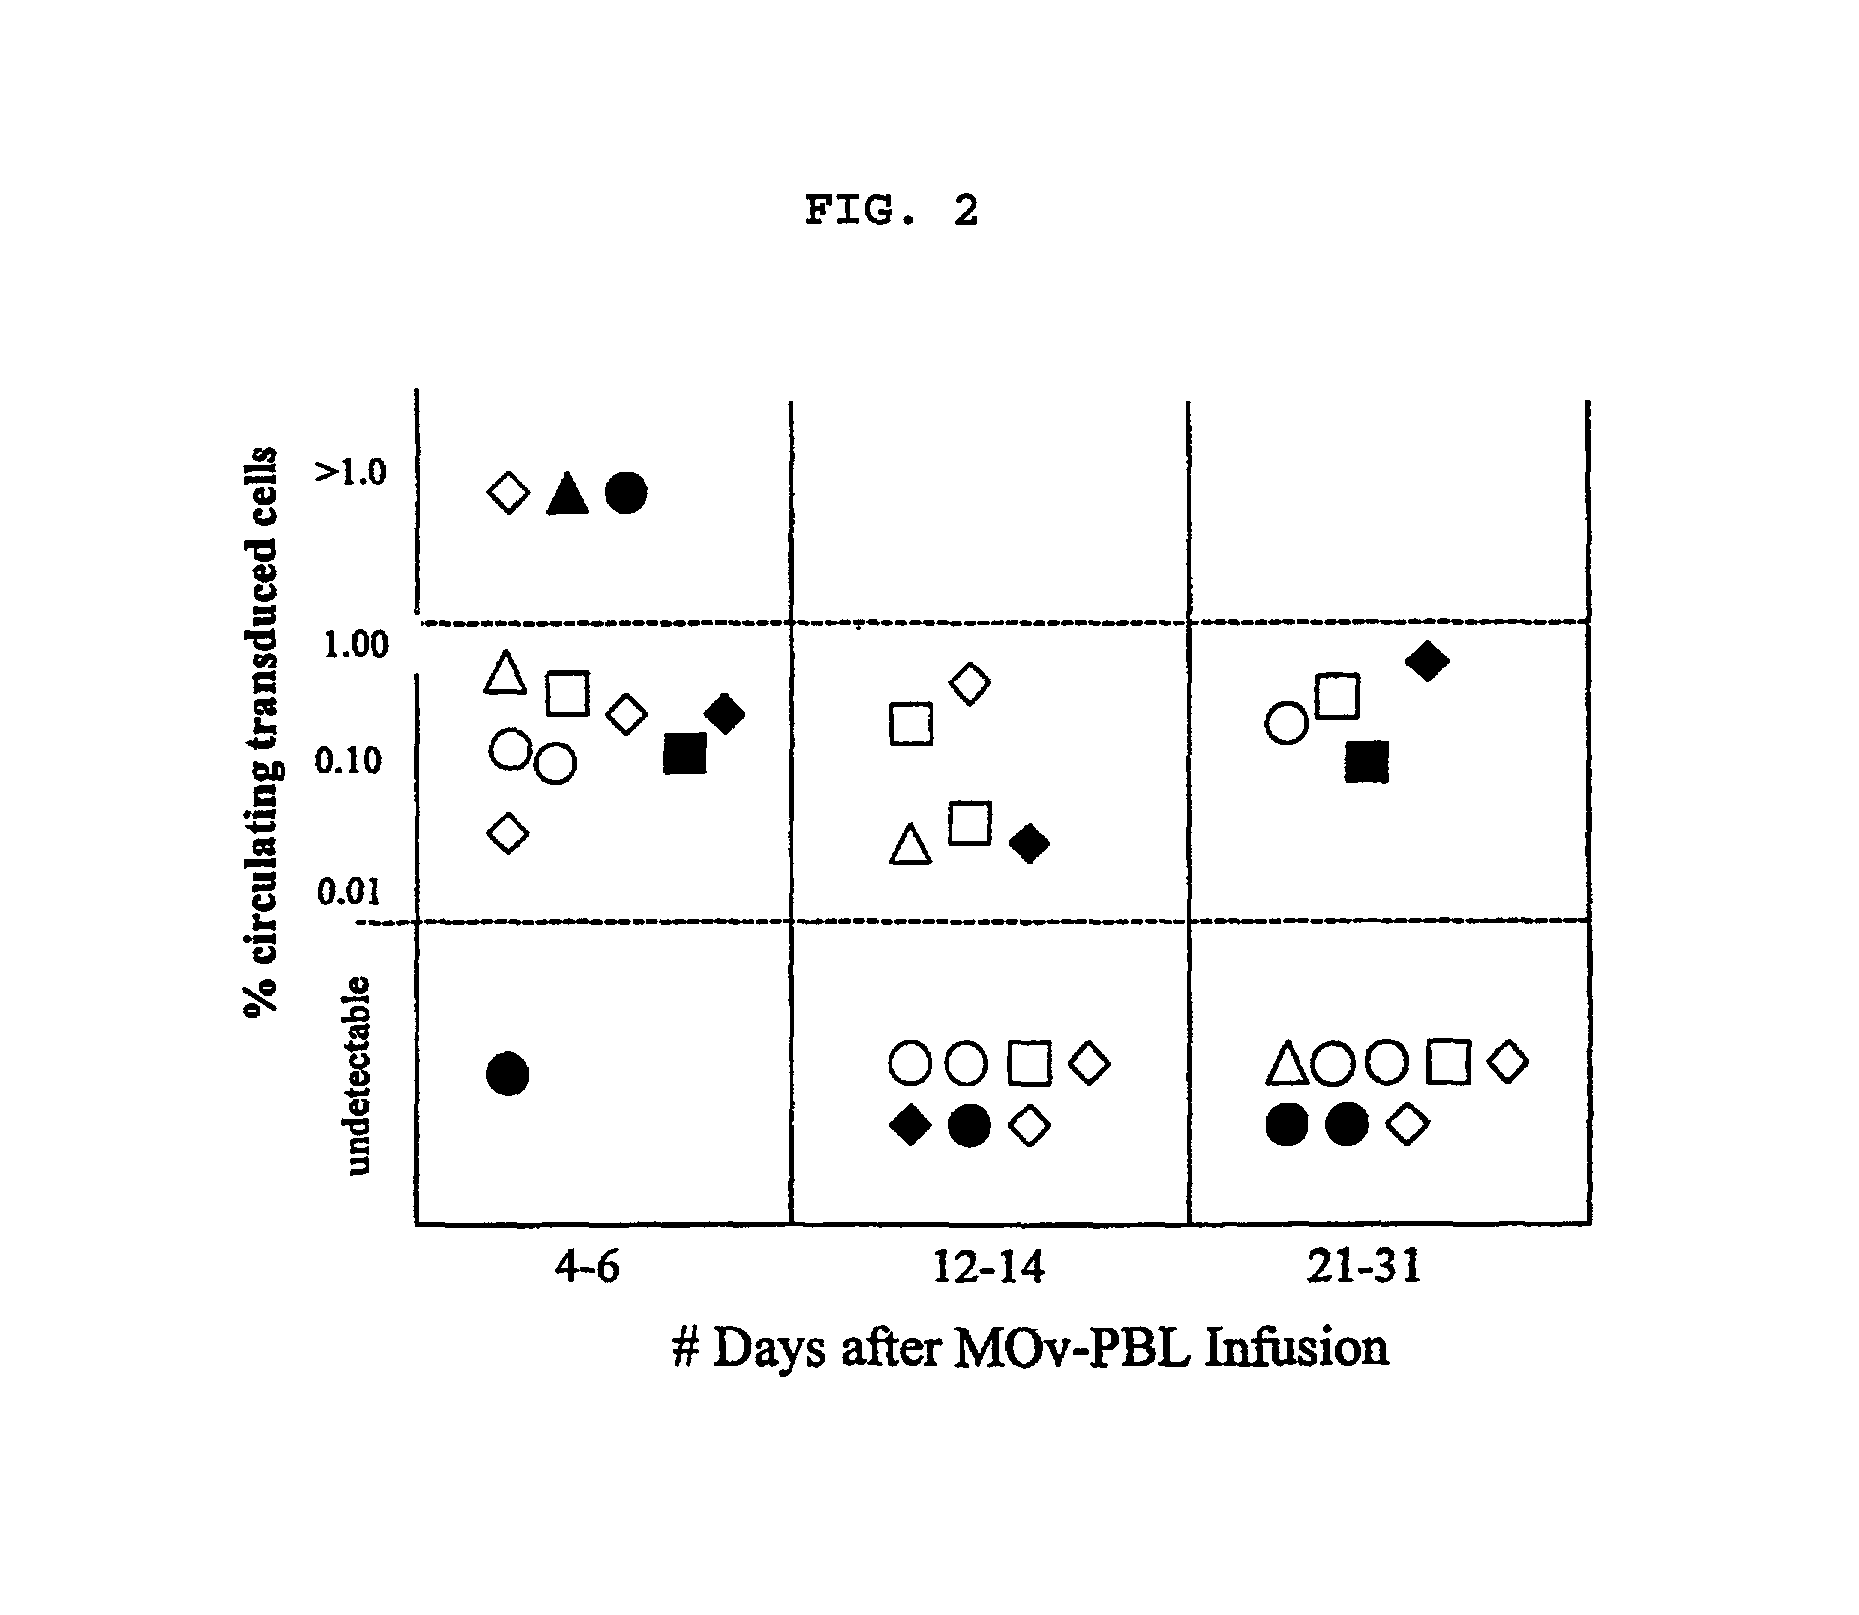 Activated dual specificity lymphocytes and their methods of use